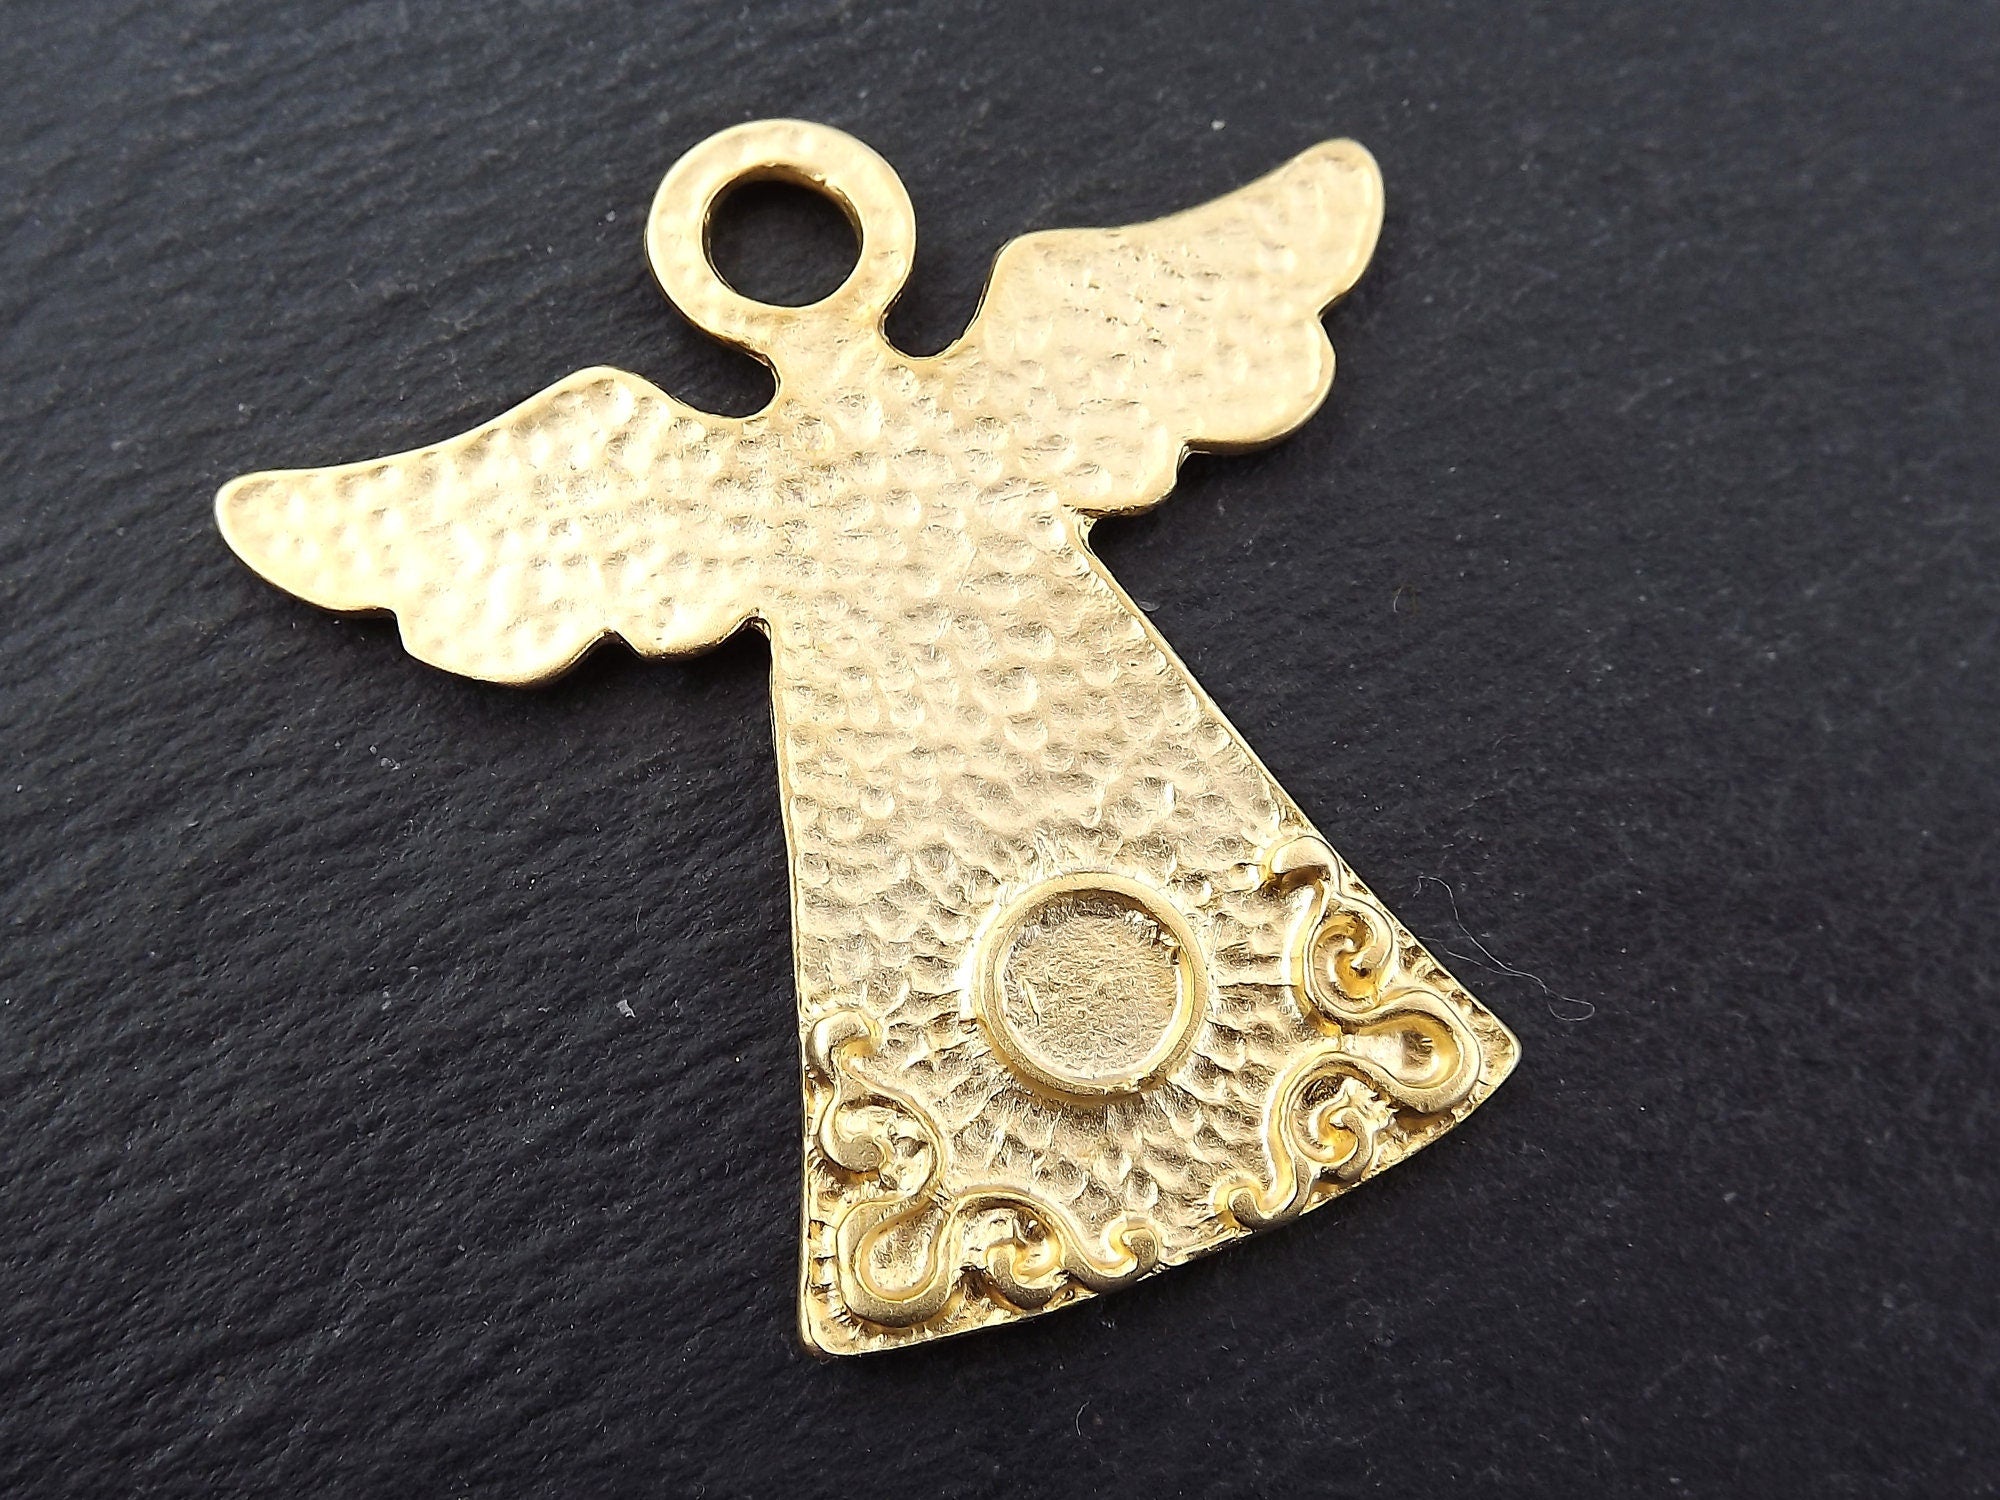 Gold Angel Pendant, Folk Guardian Angel Charm, Angel Ornament, Craft and Jewelry Supplies, 22k Matte GoldPlated, 1pc